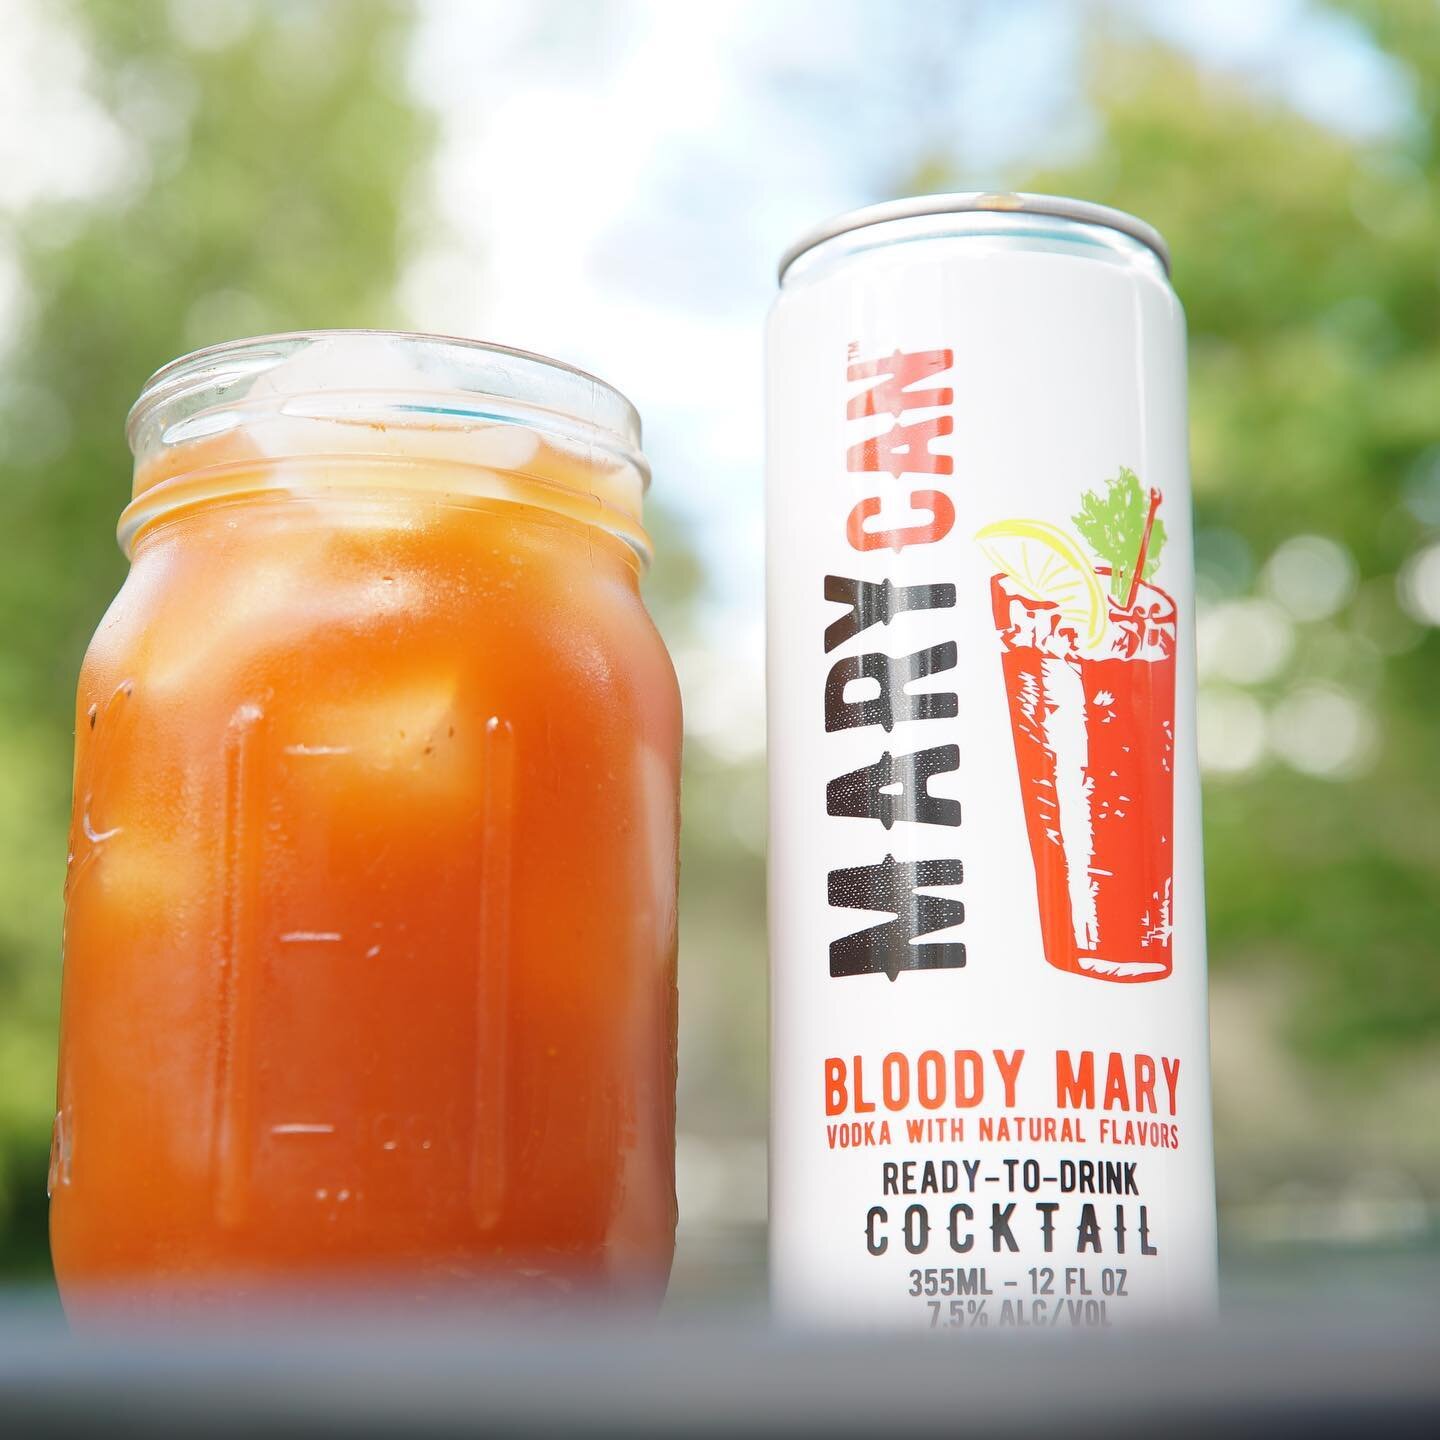 Big plans for the Fourth of July? Get to your fun faster with MaryCan ready-to-drink Bloody Mary, America's premiere canned Bloody Mary.

#bloodymary #bar2table #cannedcocktails #readytodrink #4thofJuly